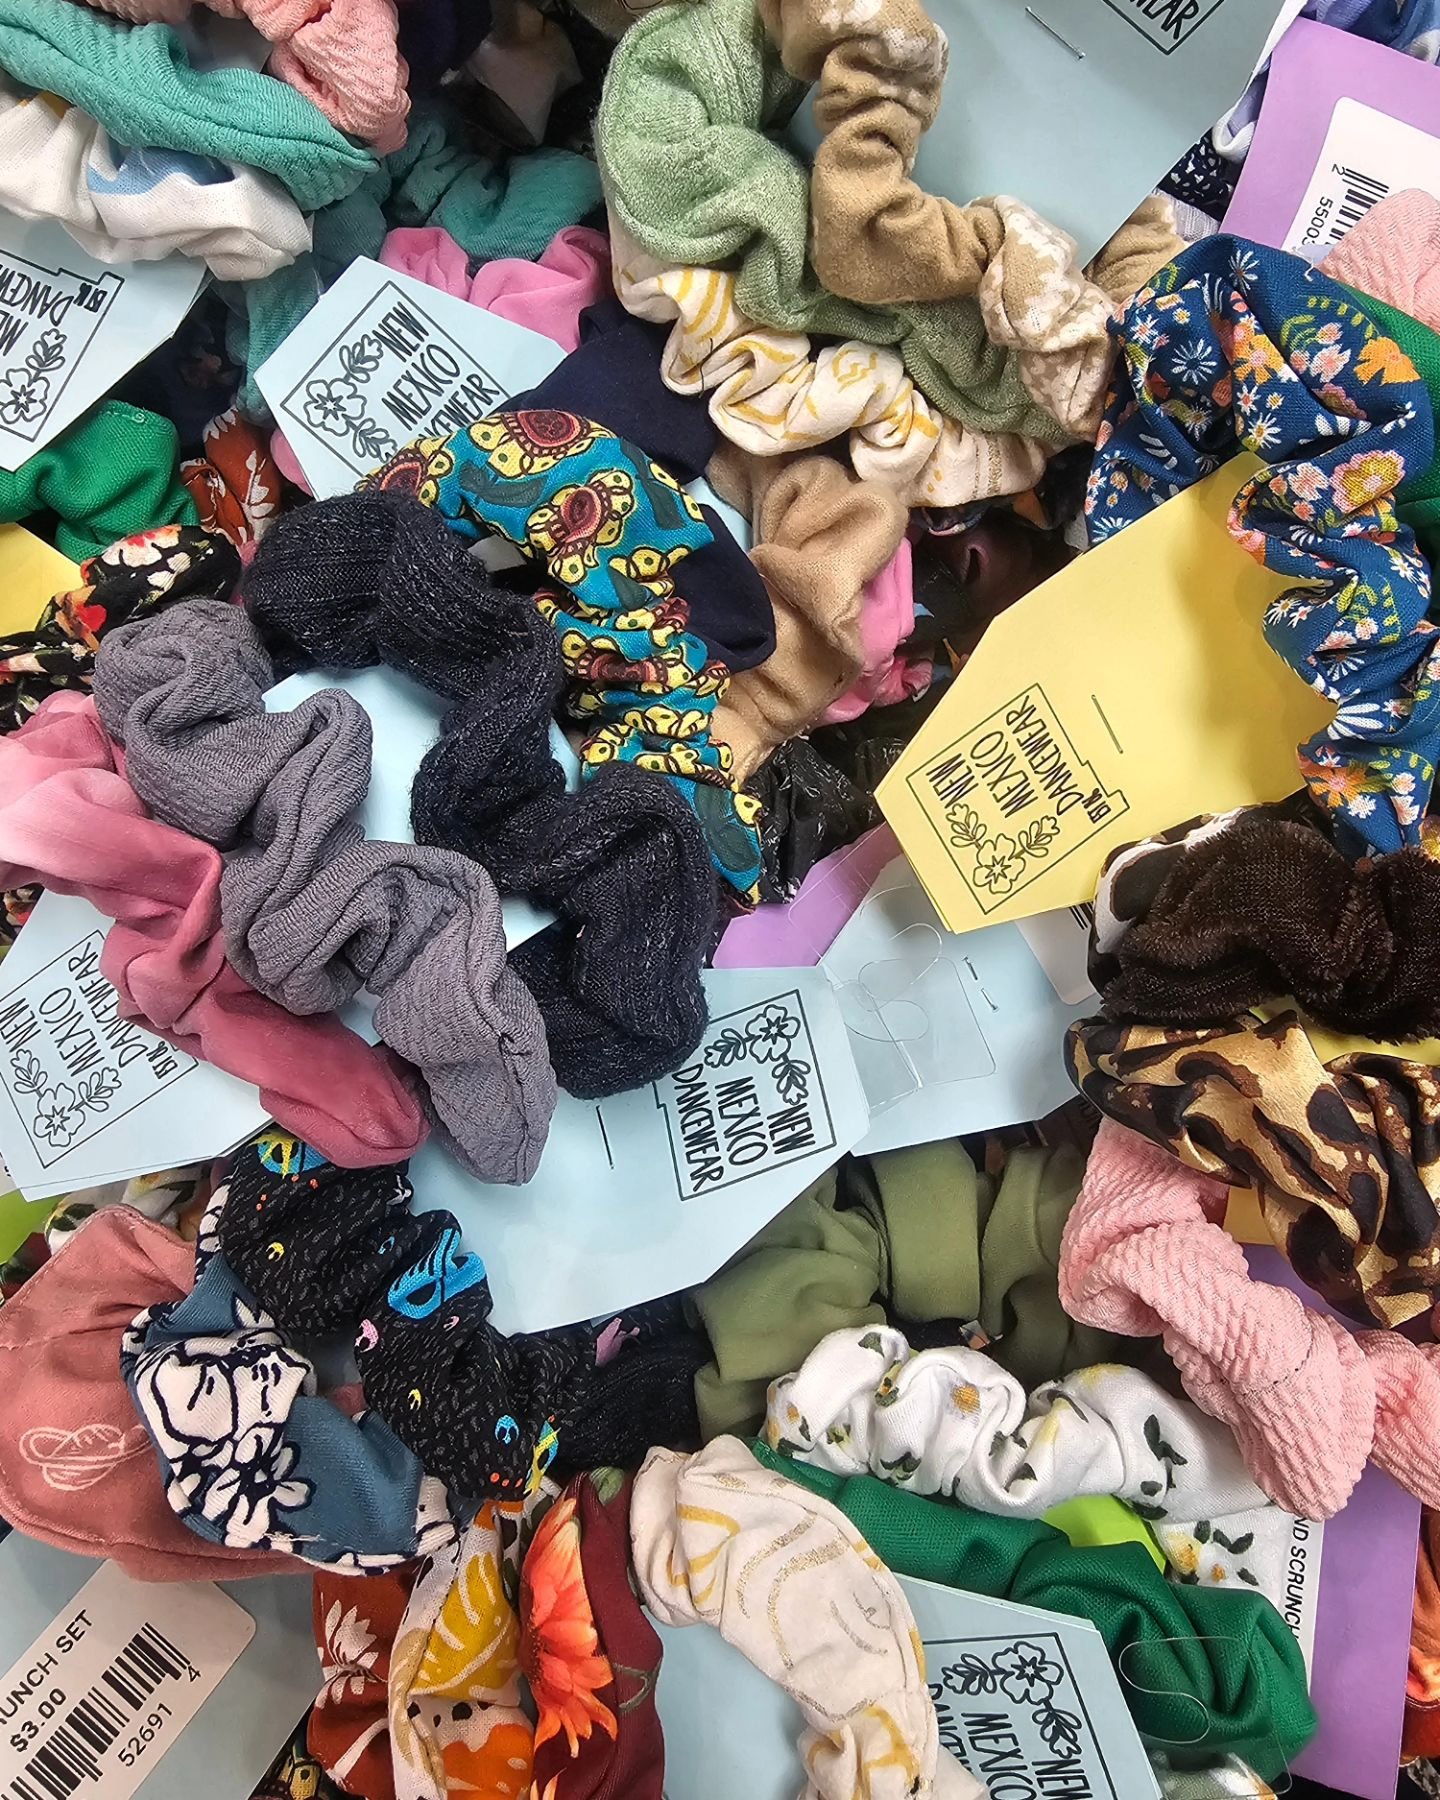 Have you seen our scrunchie sets? 🤔

They come in a wide variety of colors, patterns, and fabrics! 🌈
Made from recycled fabric ♻️
3 scrunchies for $3 💵
Eligible for shipping! 📦

#NMDancewear #dance #dancewear
#ballet #jazz #flamenco #tap #hiphop 